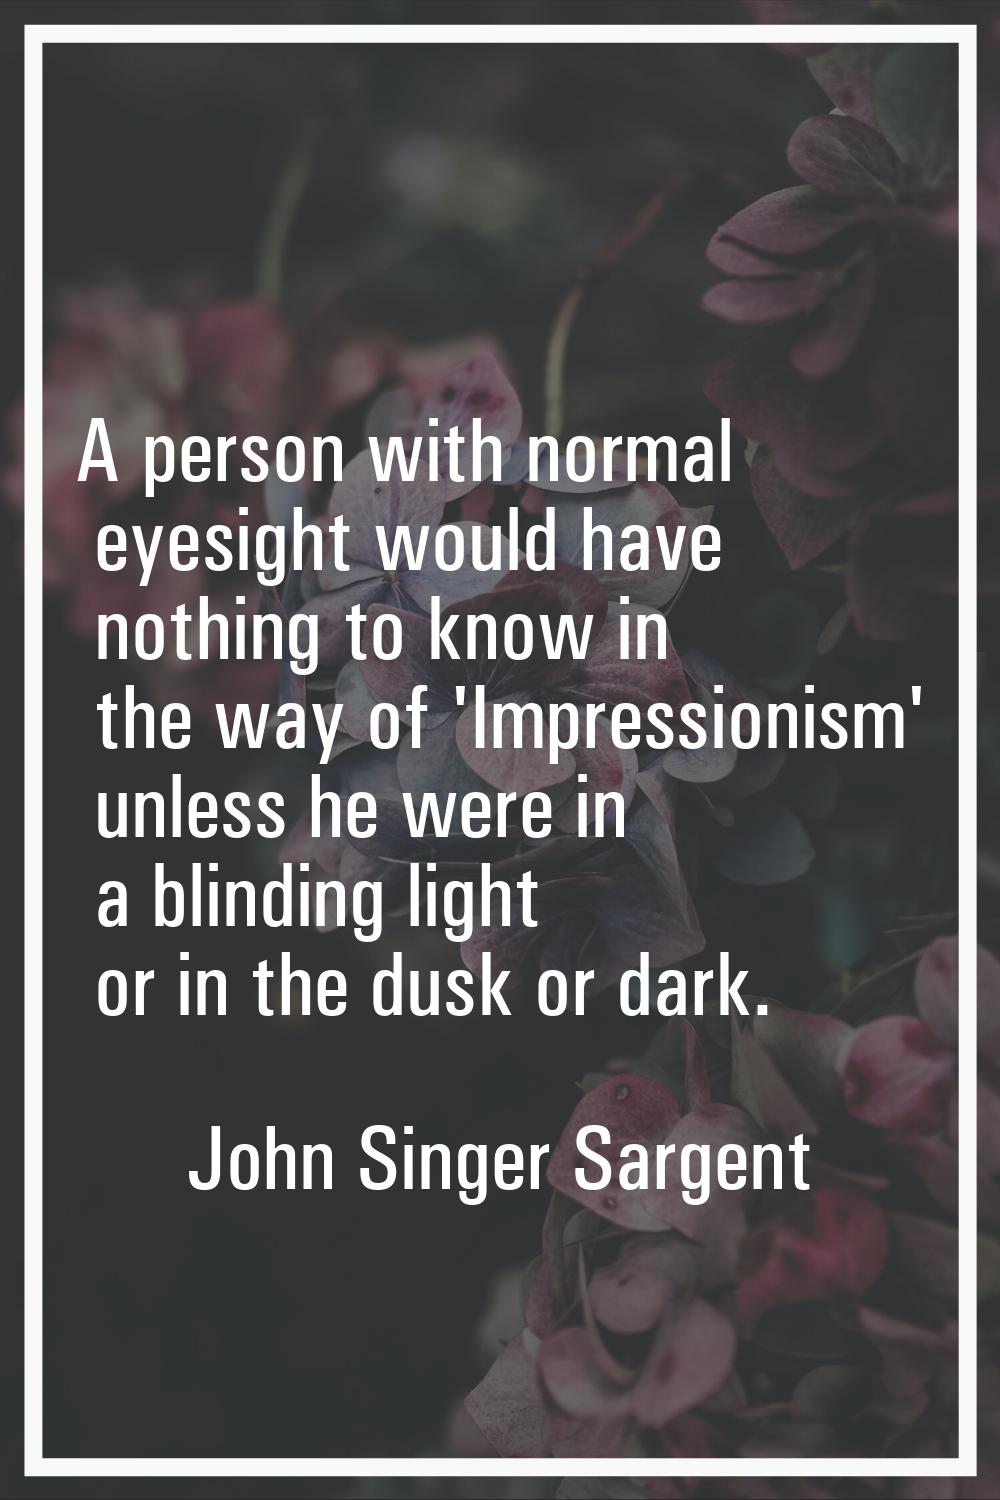 A person with normal eyesight would have nothing to know in the way of 'Impressionism' unless he we